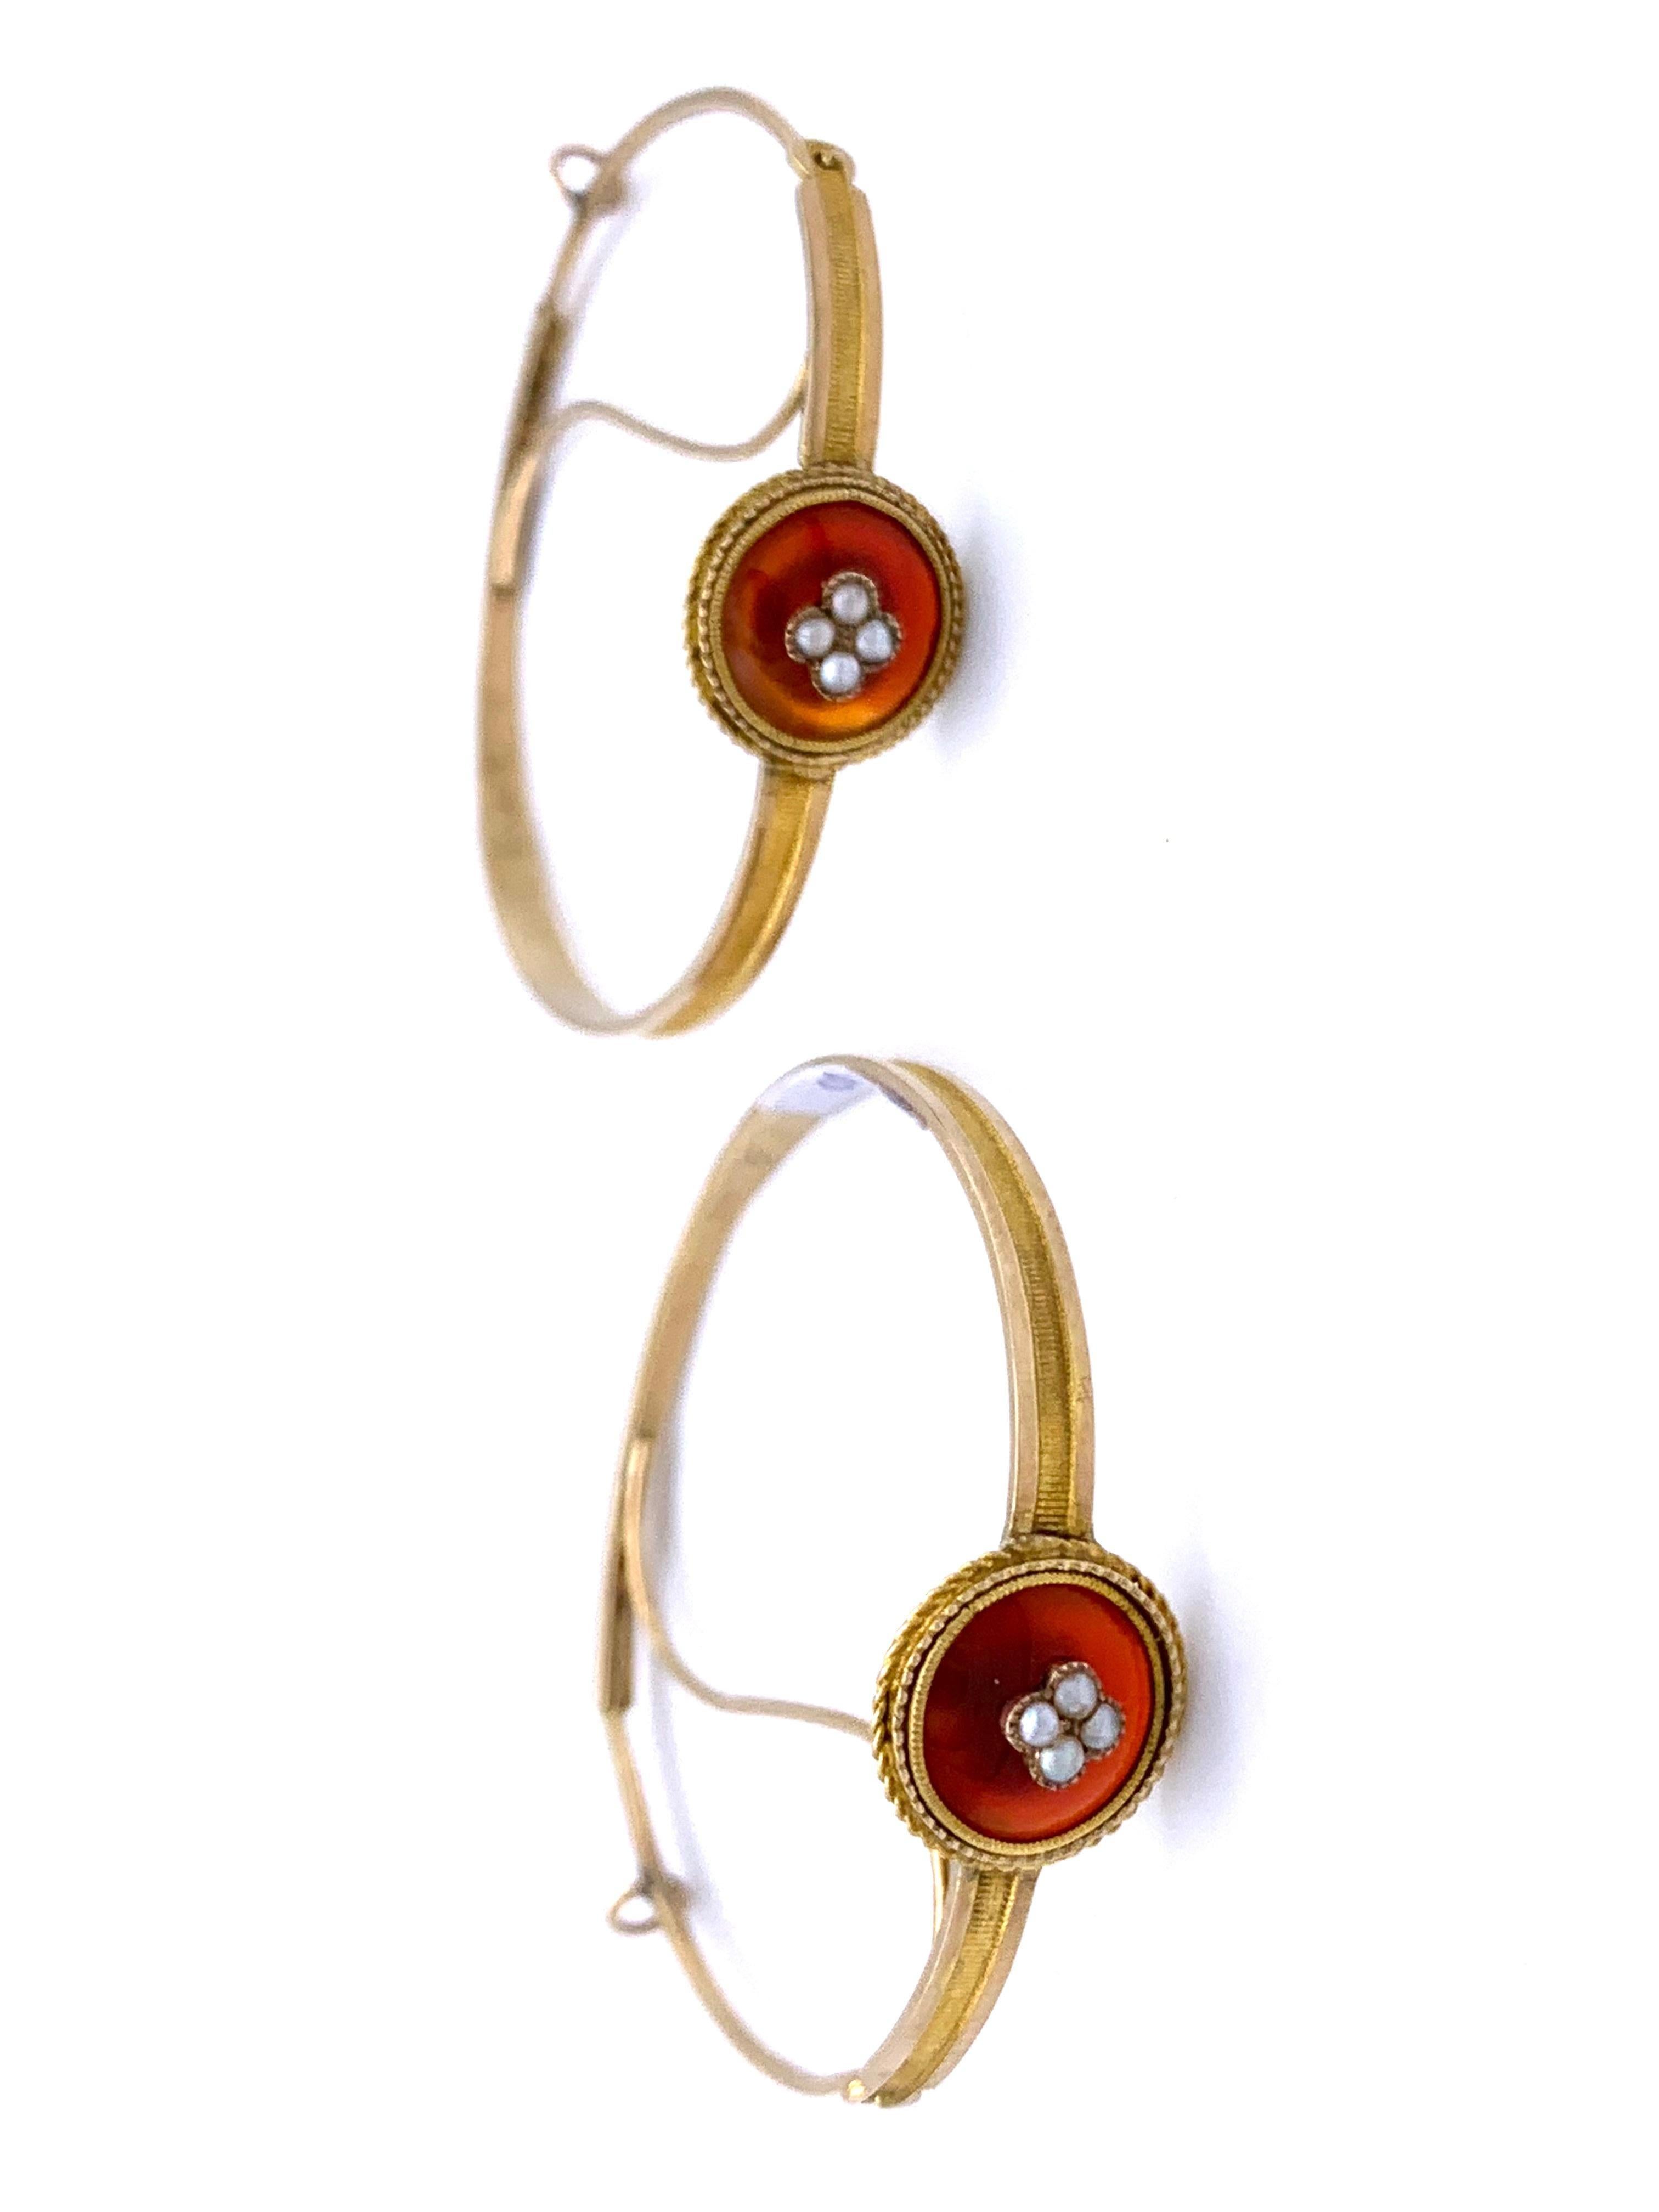 These very rare Empire gold hoop earrings were handcrafted out of 14 karat . The hoops are decorated with fine engraved lines. Each hoop is embellished  with a carnelian cabochon mounted in setting with a twisted gold wire surround. The two